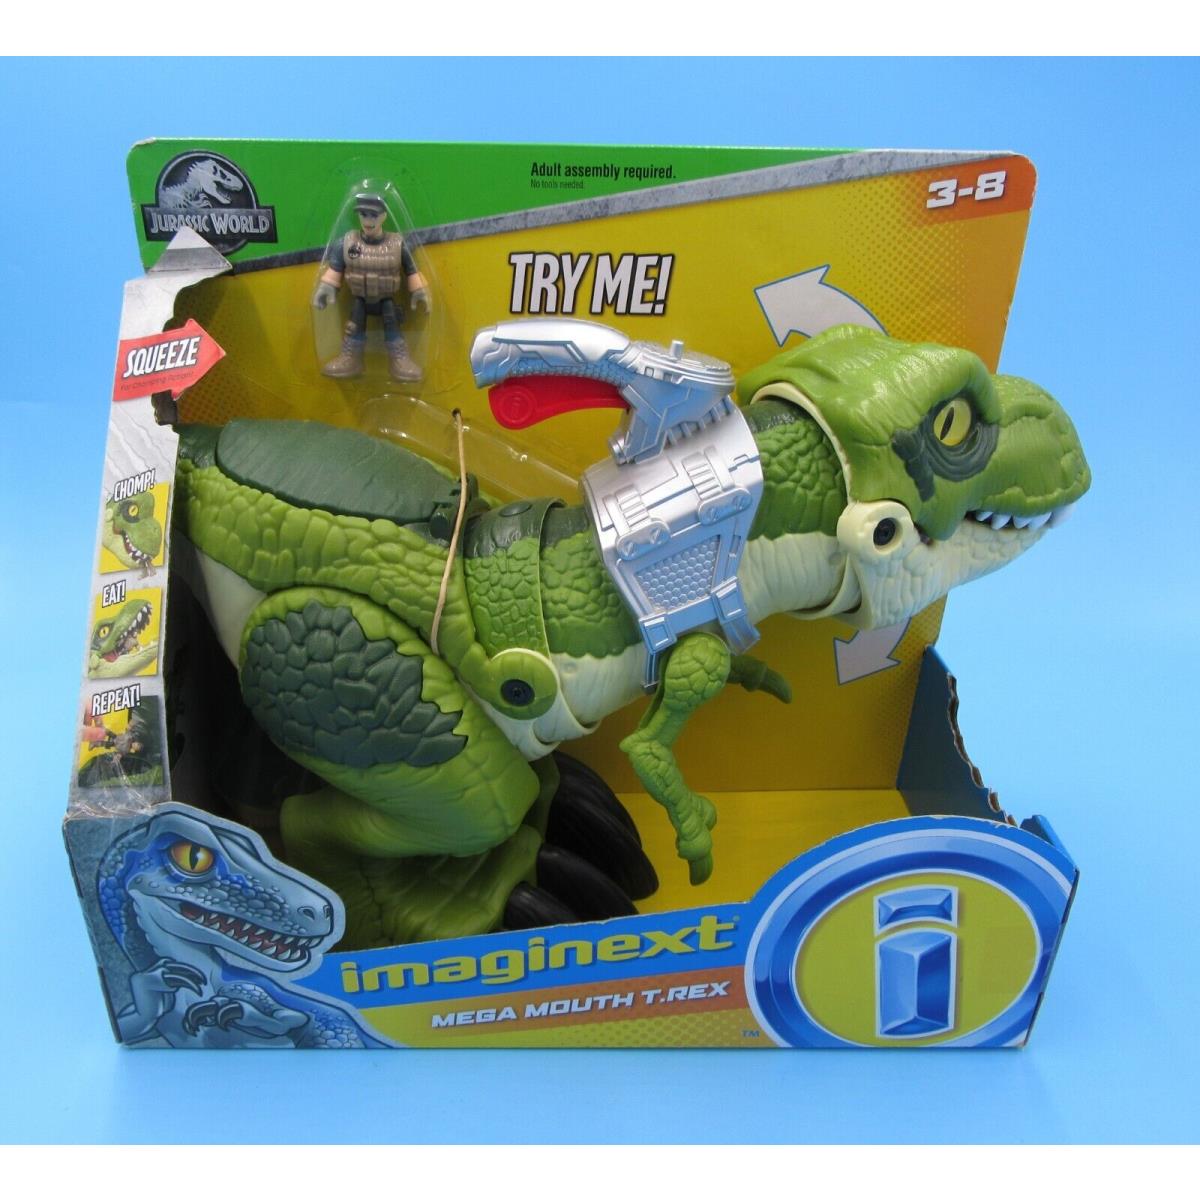 Jurassic World Fisher-price Imaginext Mega Mouth T.rex Toy Dinosaur For